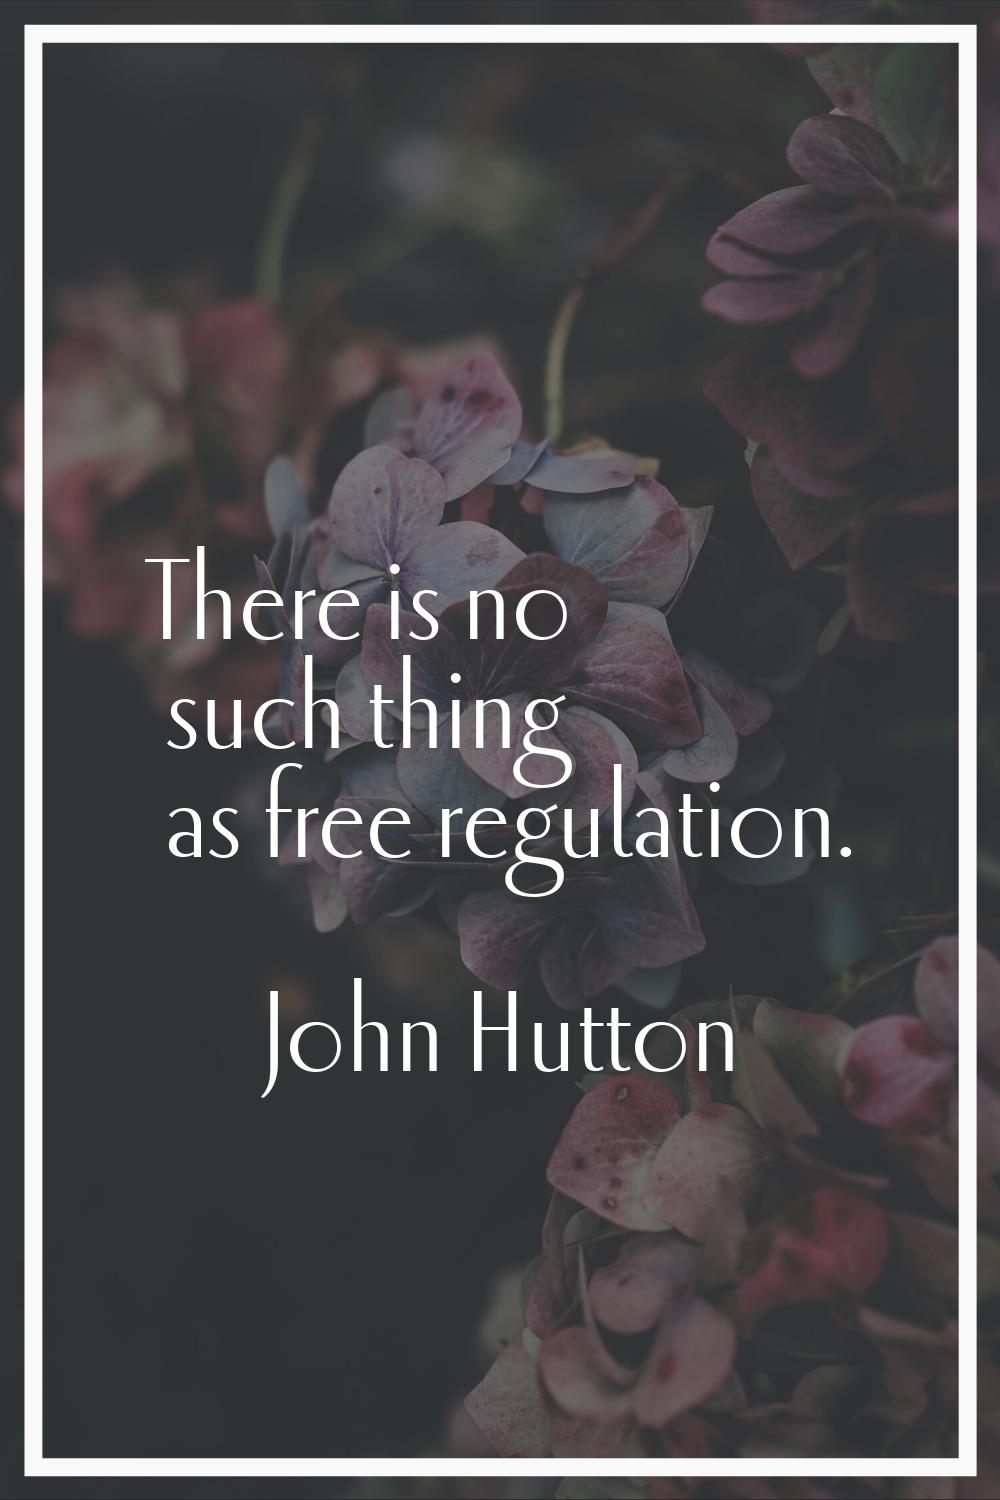 There is no such thing as free regulation.